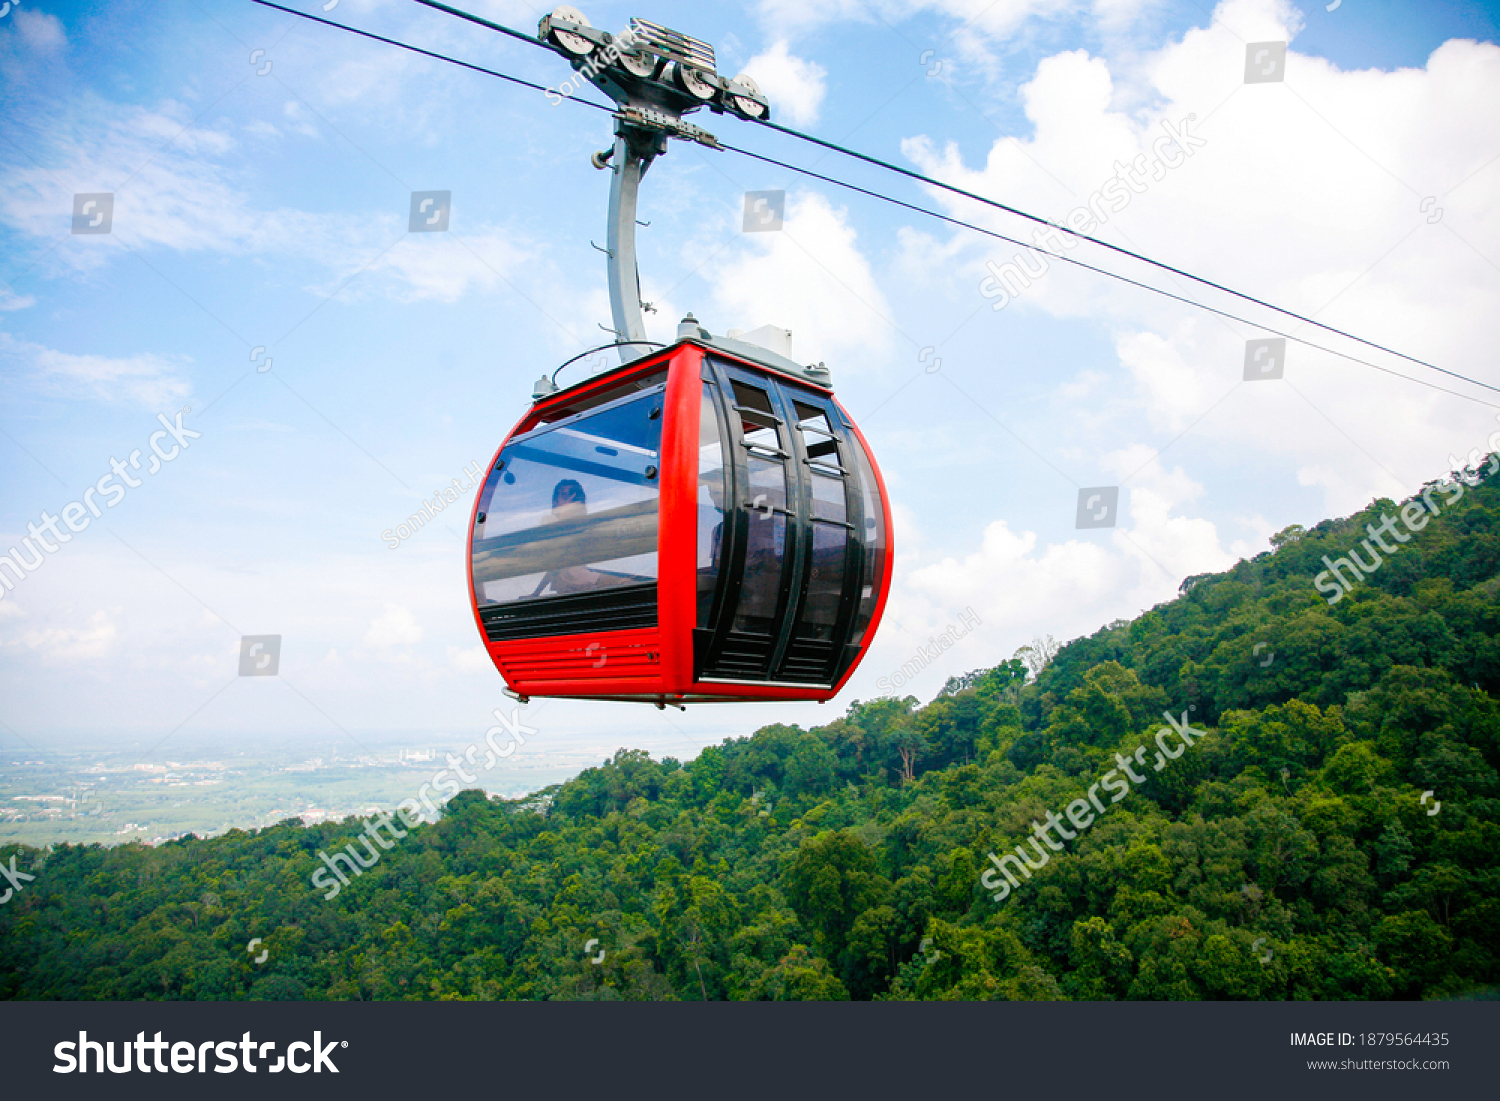 Cable car trip to viewpoints in the mountains. During the trip by cable car Tourists enjoy beautiful views and experience exciting. #1879564435